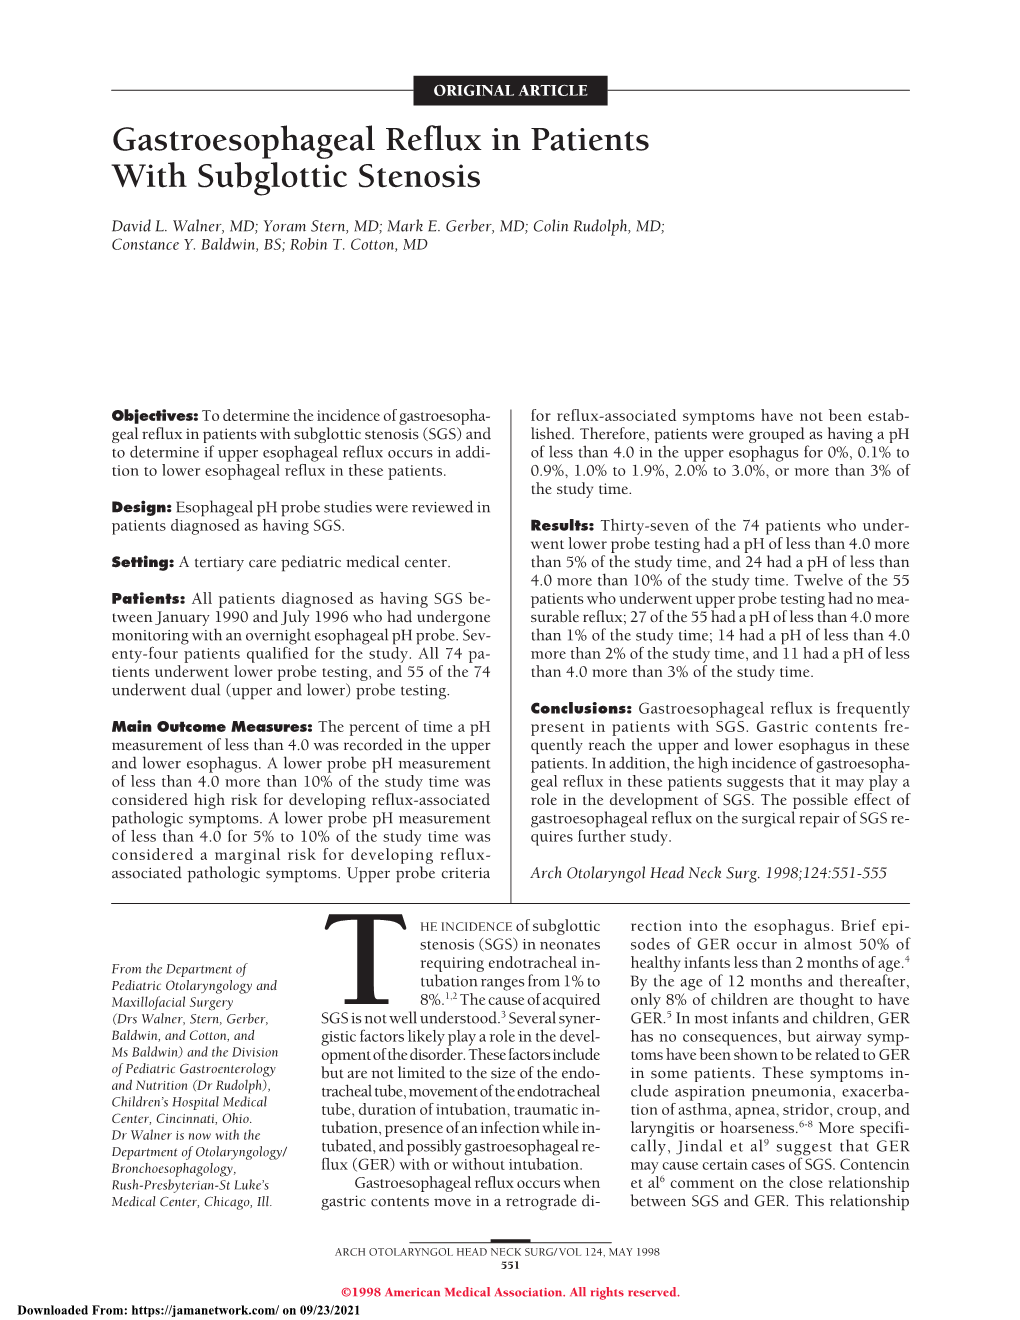 Gastroesophageal Reflux in Patients with Subglottic Stenosis